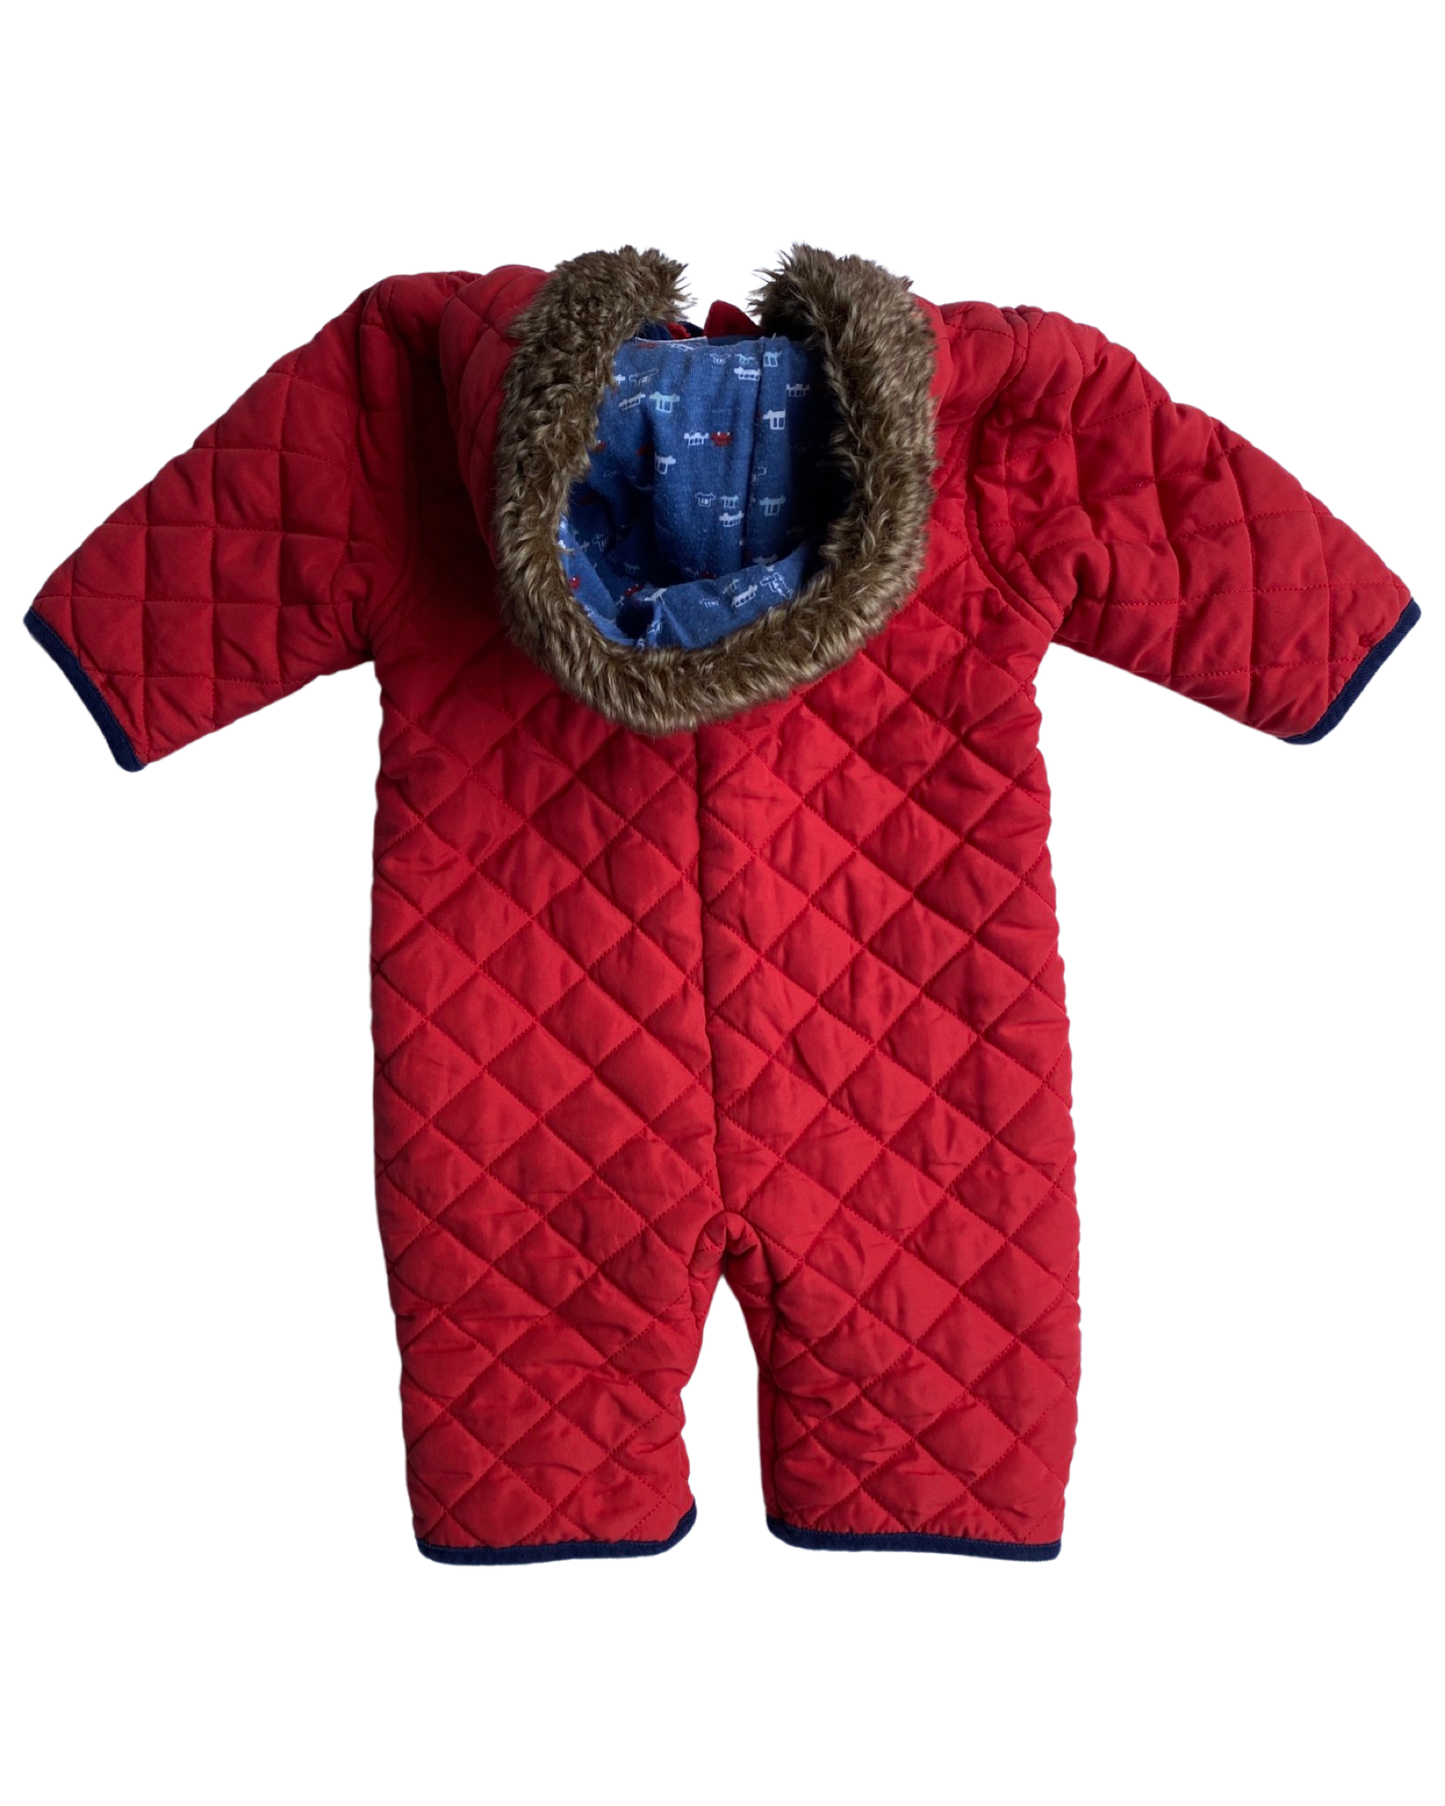 Miniclub red quilted pramsuit (6-9mths)